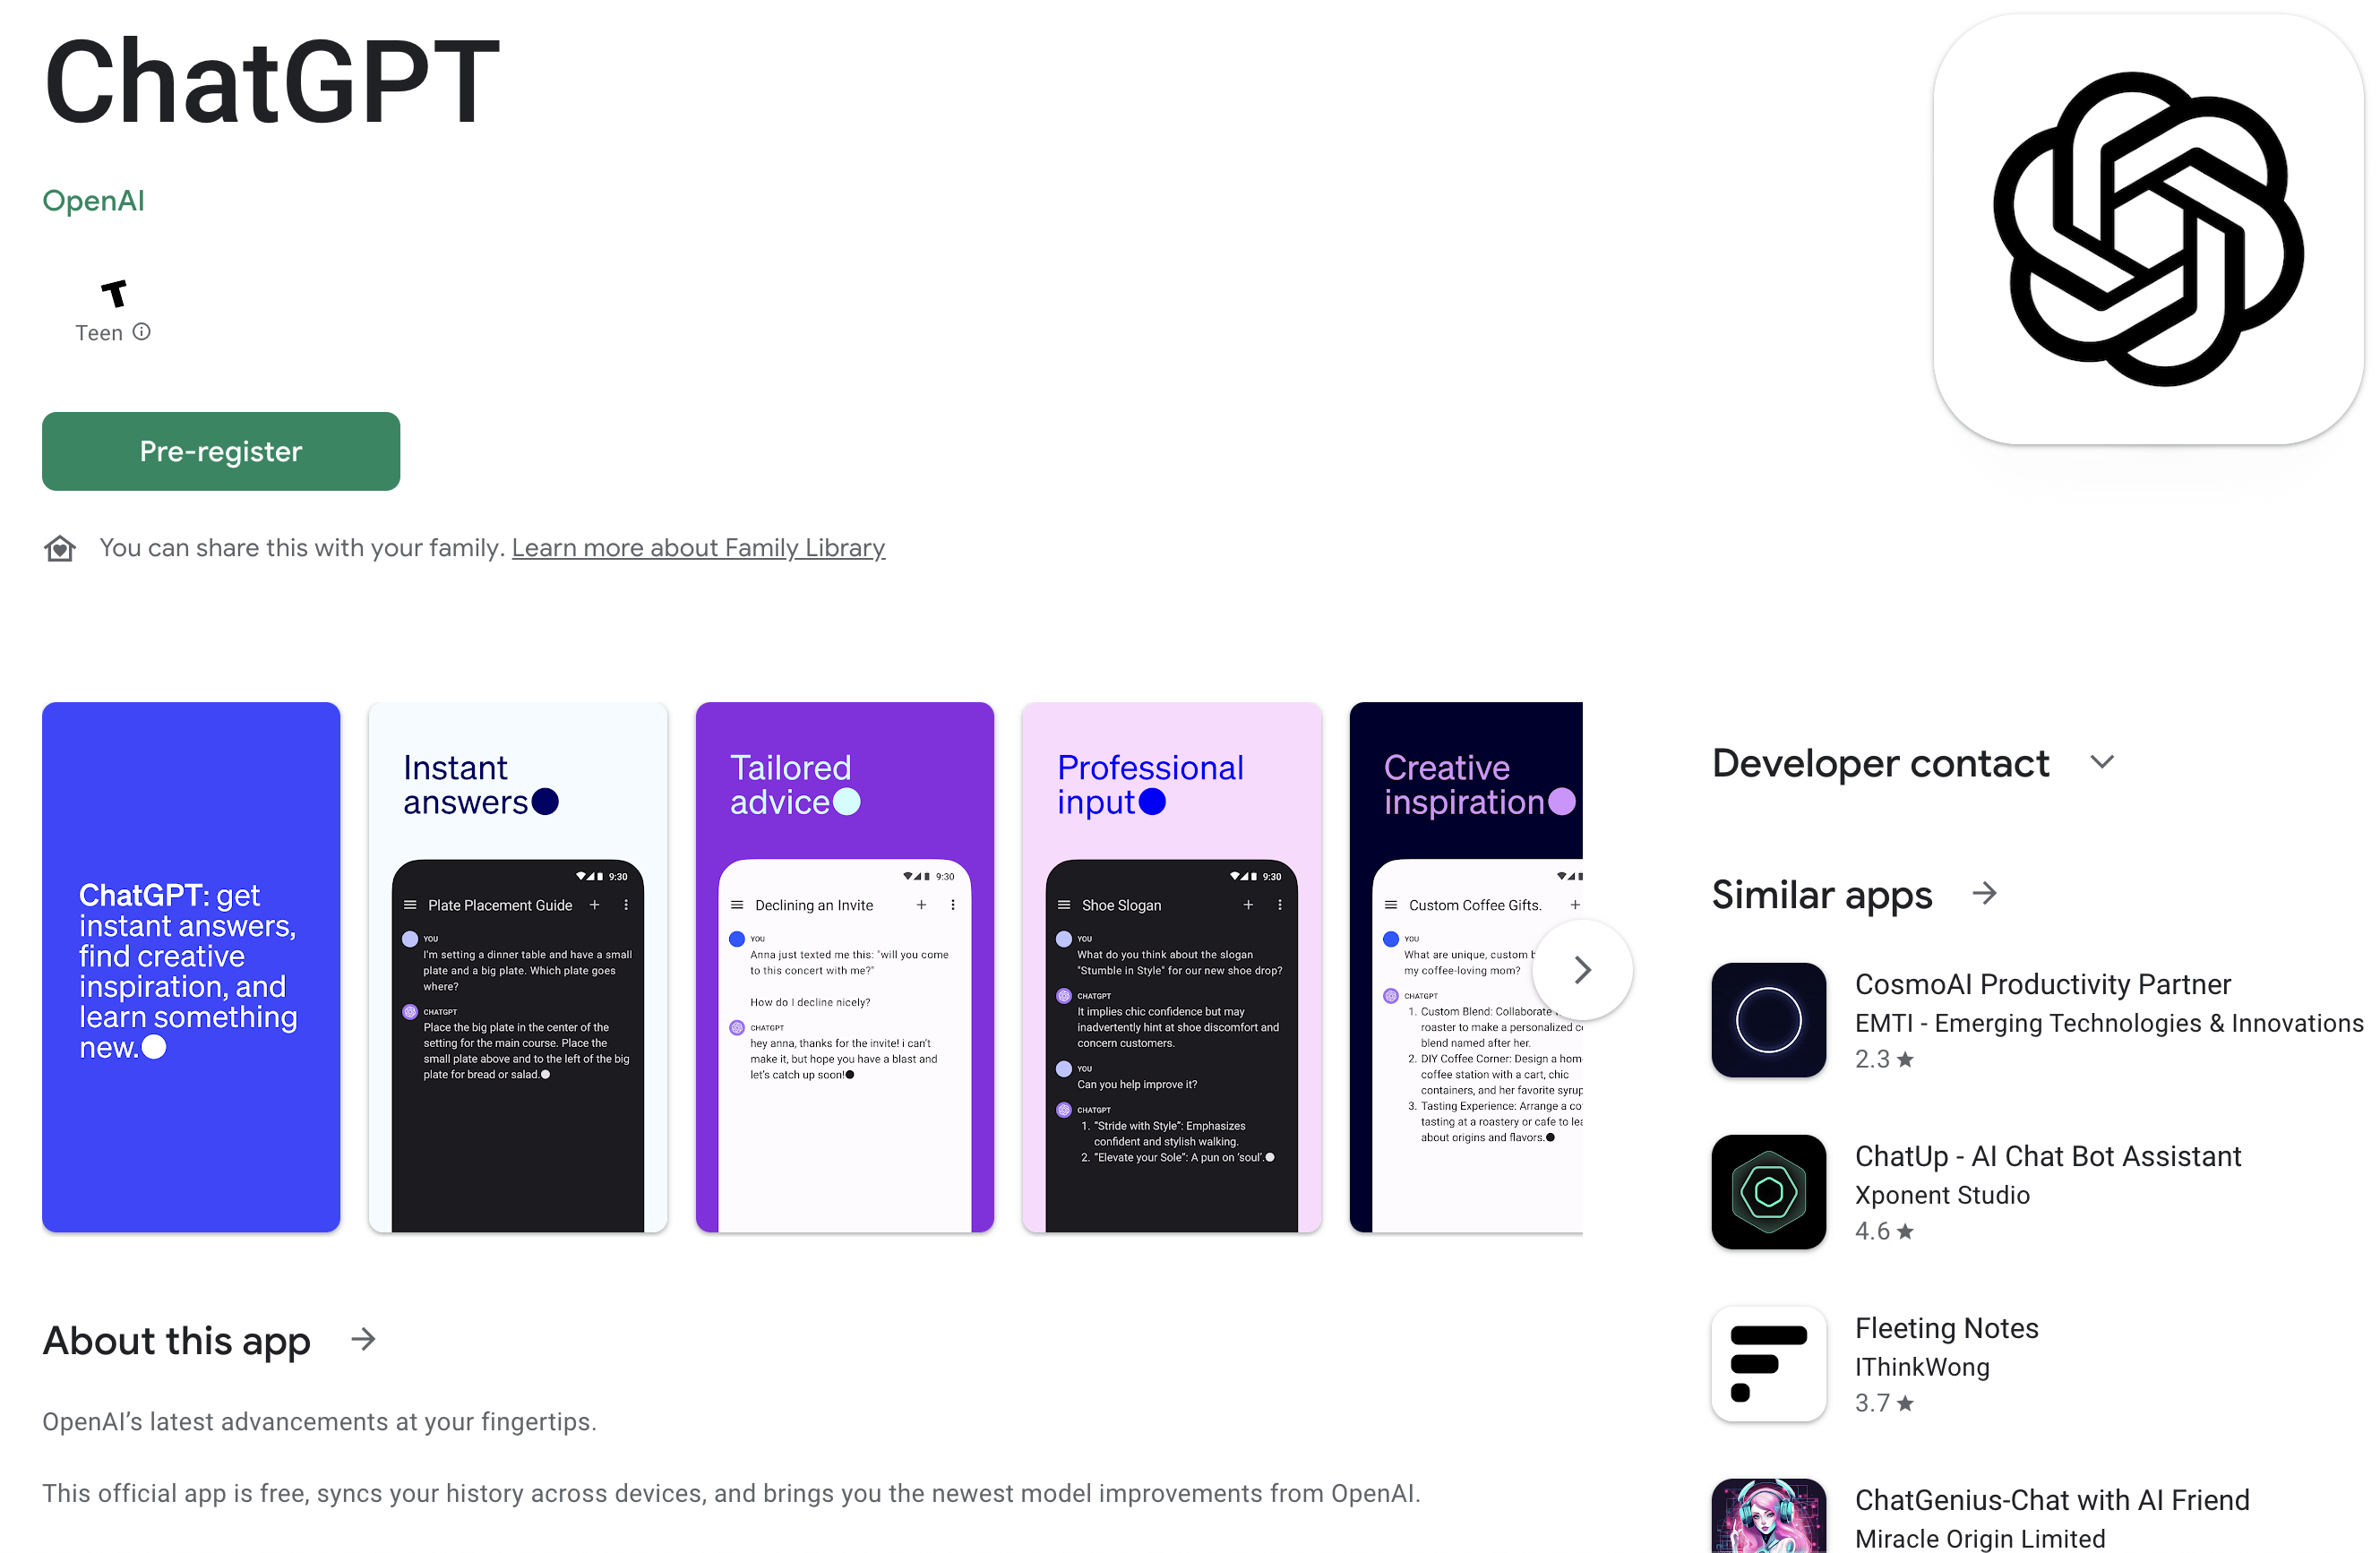 ChatGPT Android App is available for pre-registration on Google Play Store